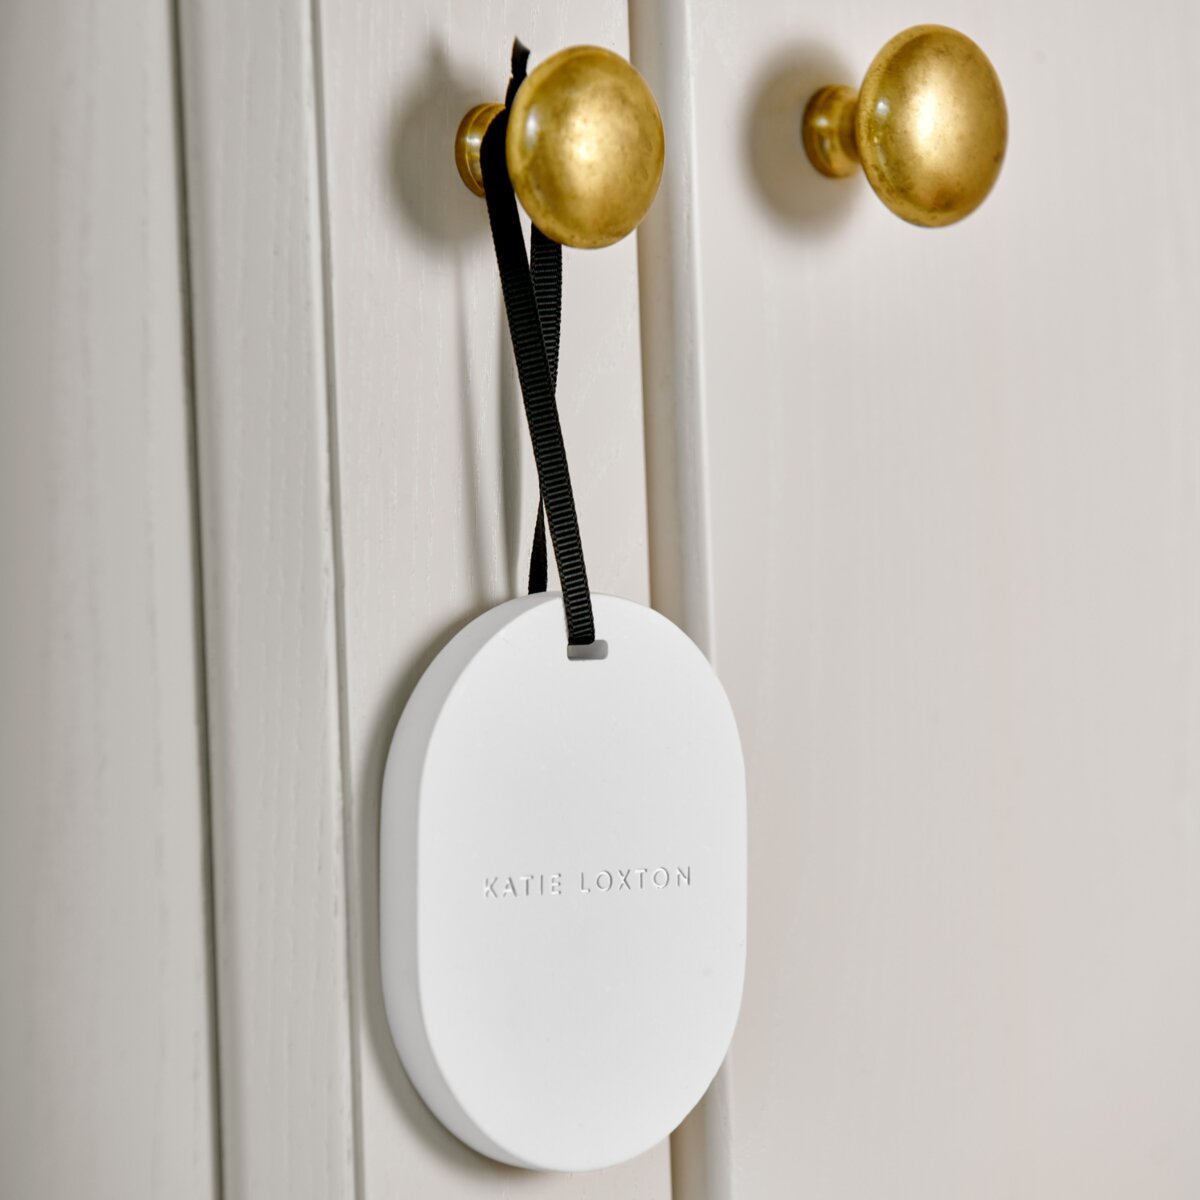 Pebble shaped white cermaic diffuser hanger hanging by its ribbon from a gold door knob.